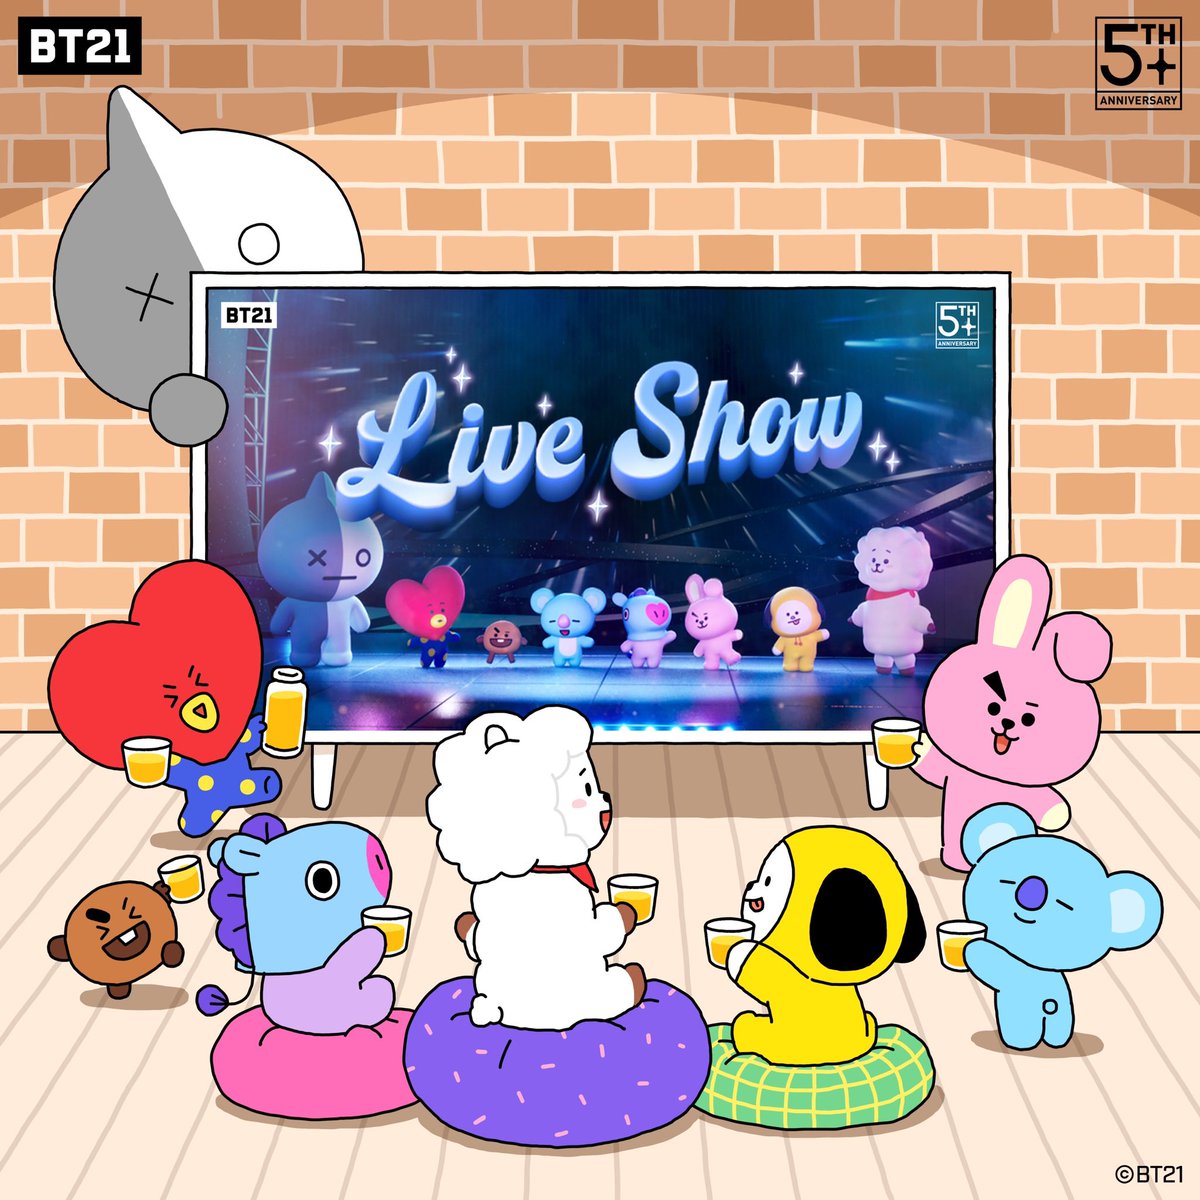 UNISTARS, did you miss our live?
Don’t worry!😎

We prepared a full recording for re-watch!
Come here and enjoy our vibe✨

WATCH NOW via the link below🎶

⏪Re-watch BT21 LIVE SHOW
> lin.ee/DzAo9aF/hntj 

#2022BT21FESTIVAL #BT21 #5th_ANNIVERSARY